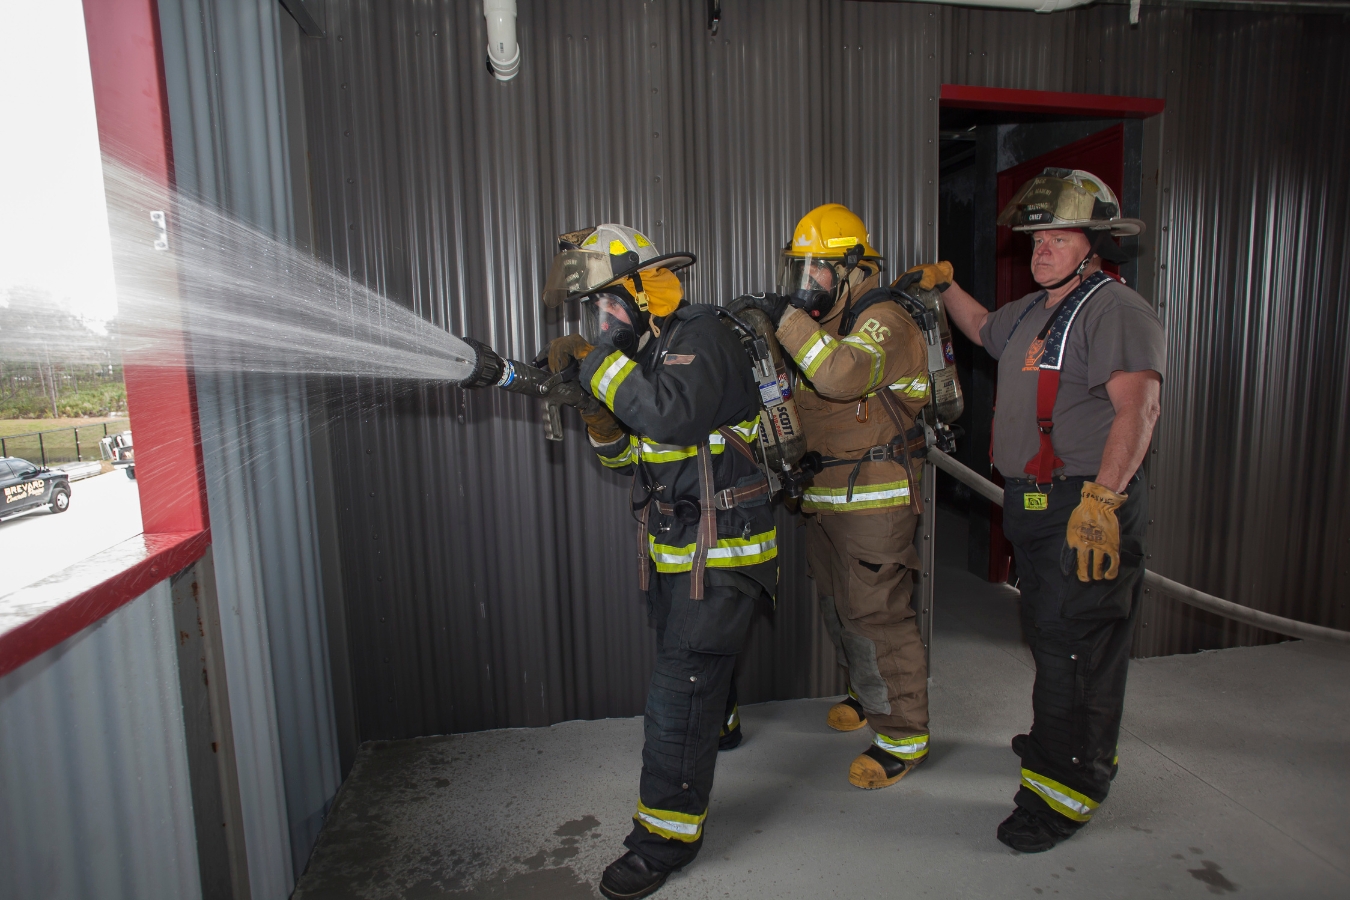 firefighter students working from the inside of the fire academy tower to use a hose and spray water outside of a window to simulate different ways to put out fires